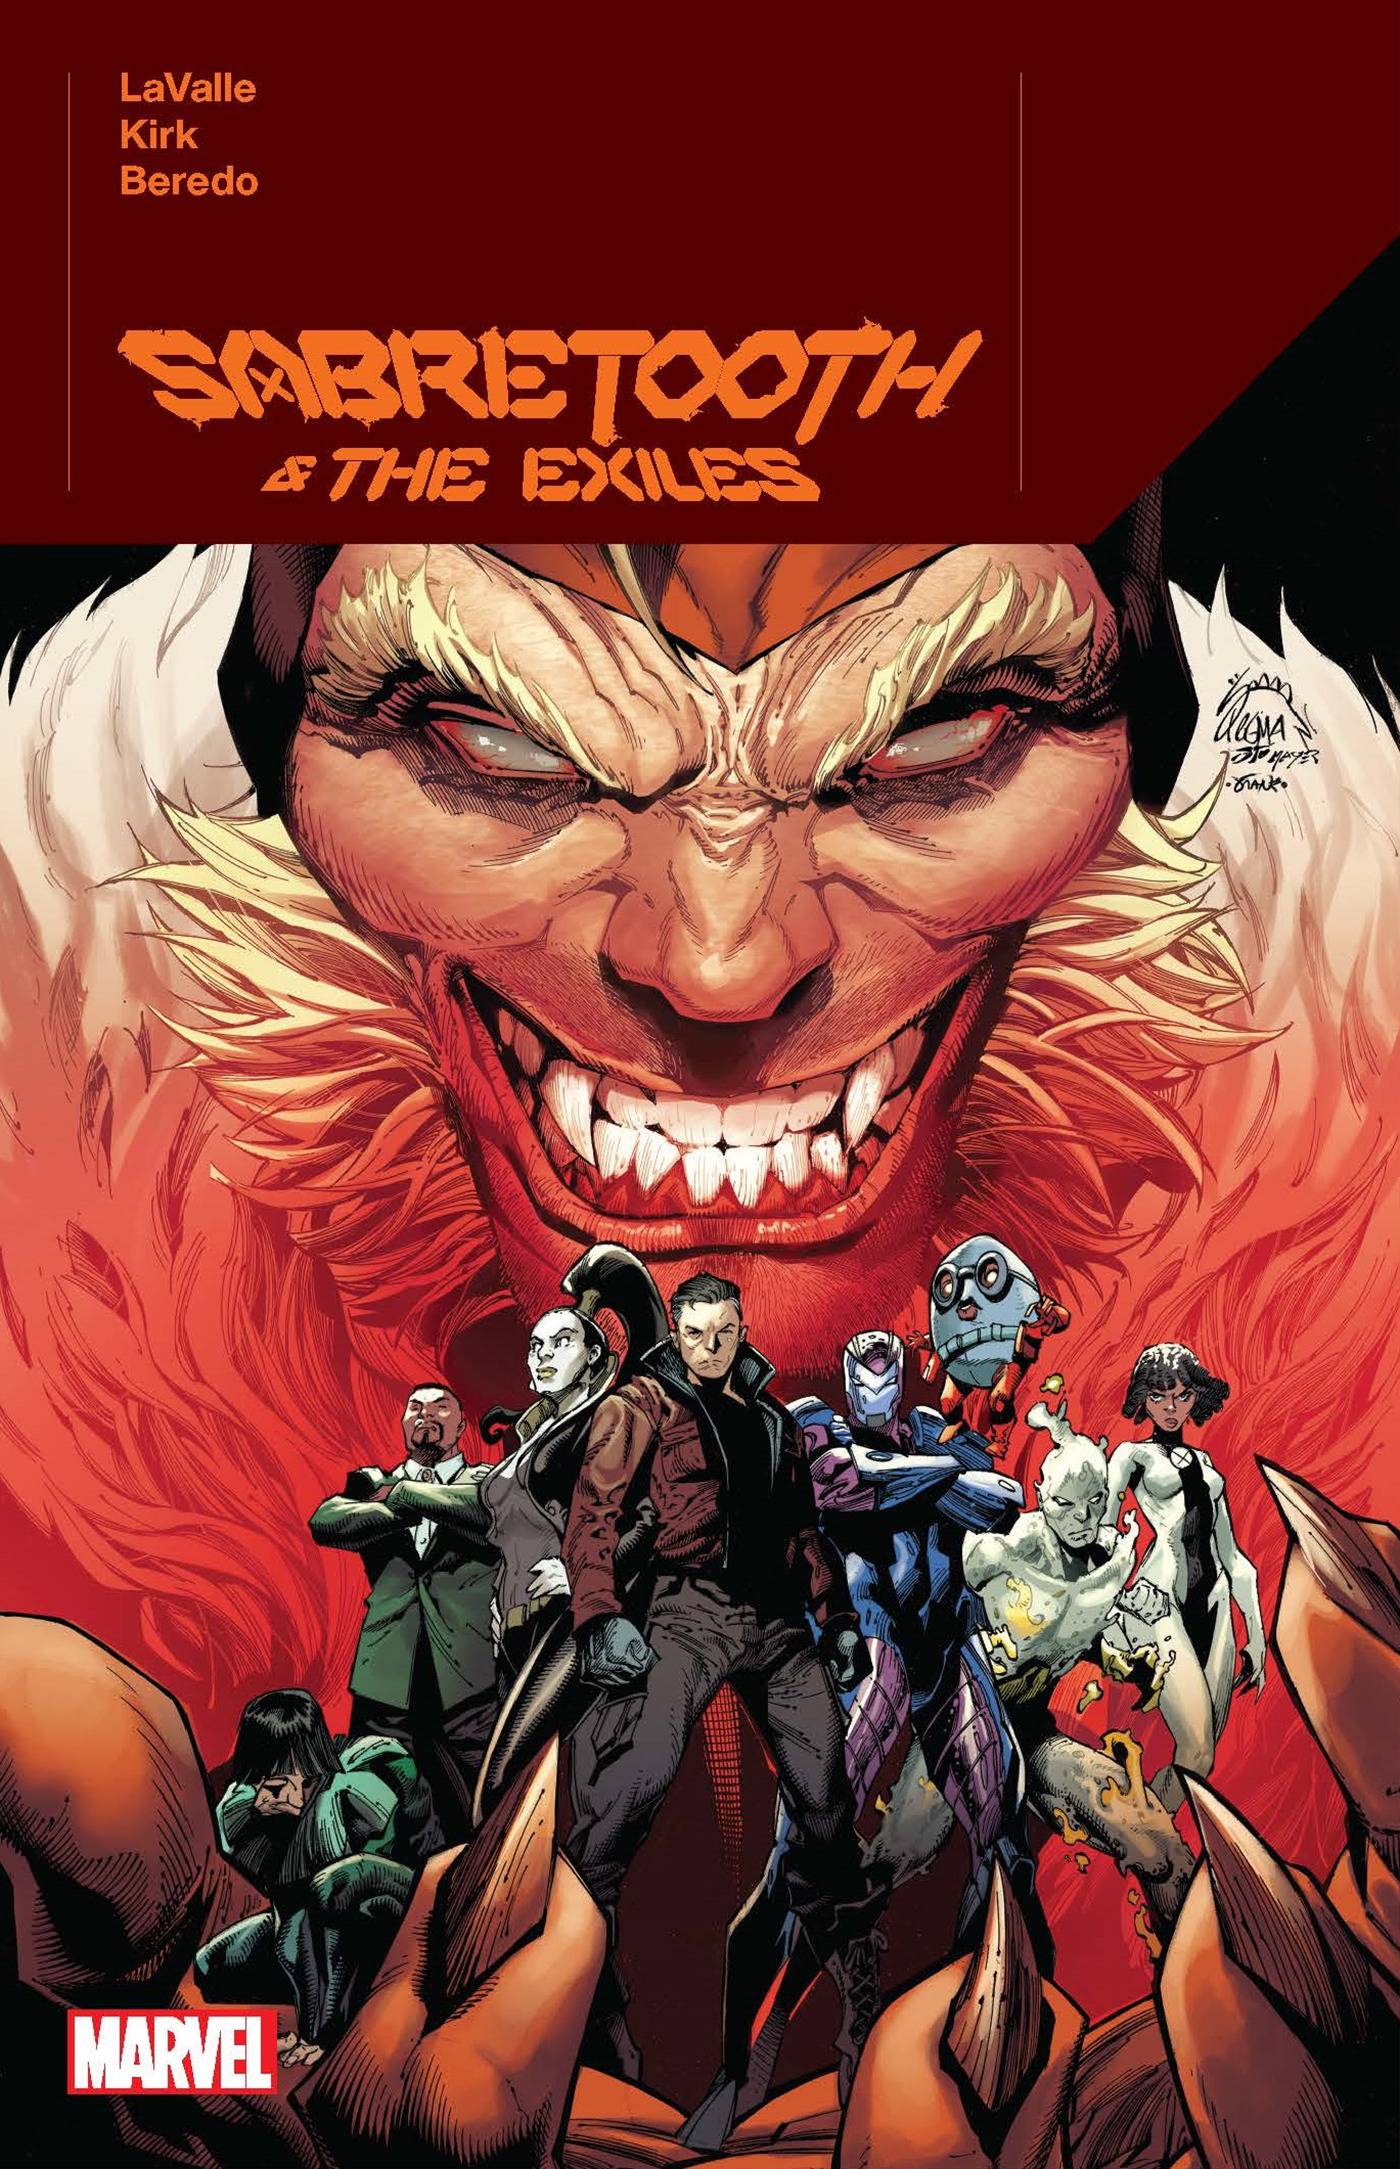 SABRETOOTH AND THE EXILES TP ***Medium damaged copy***